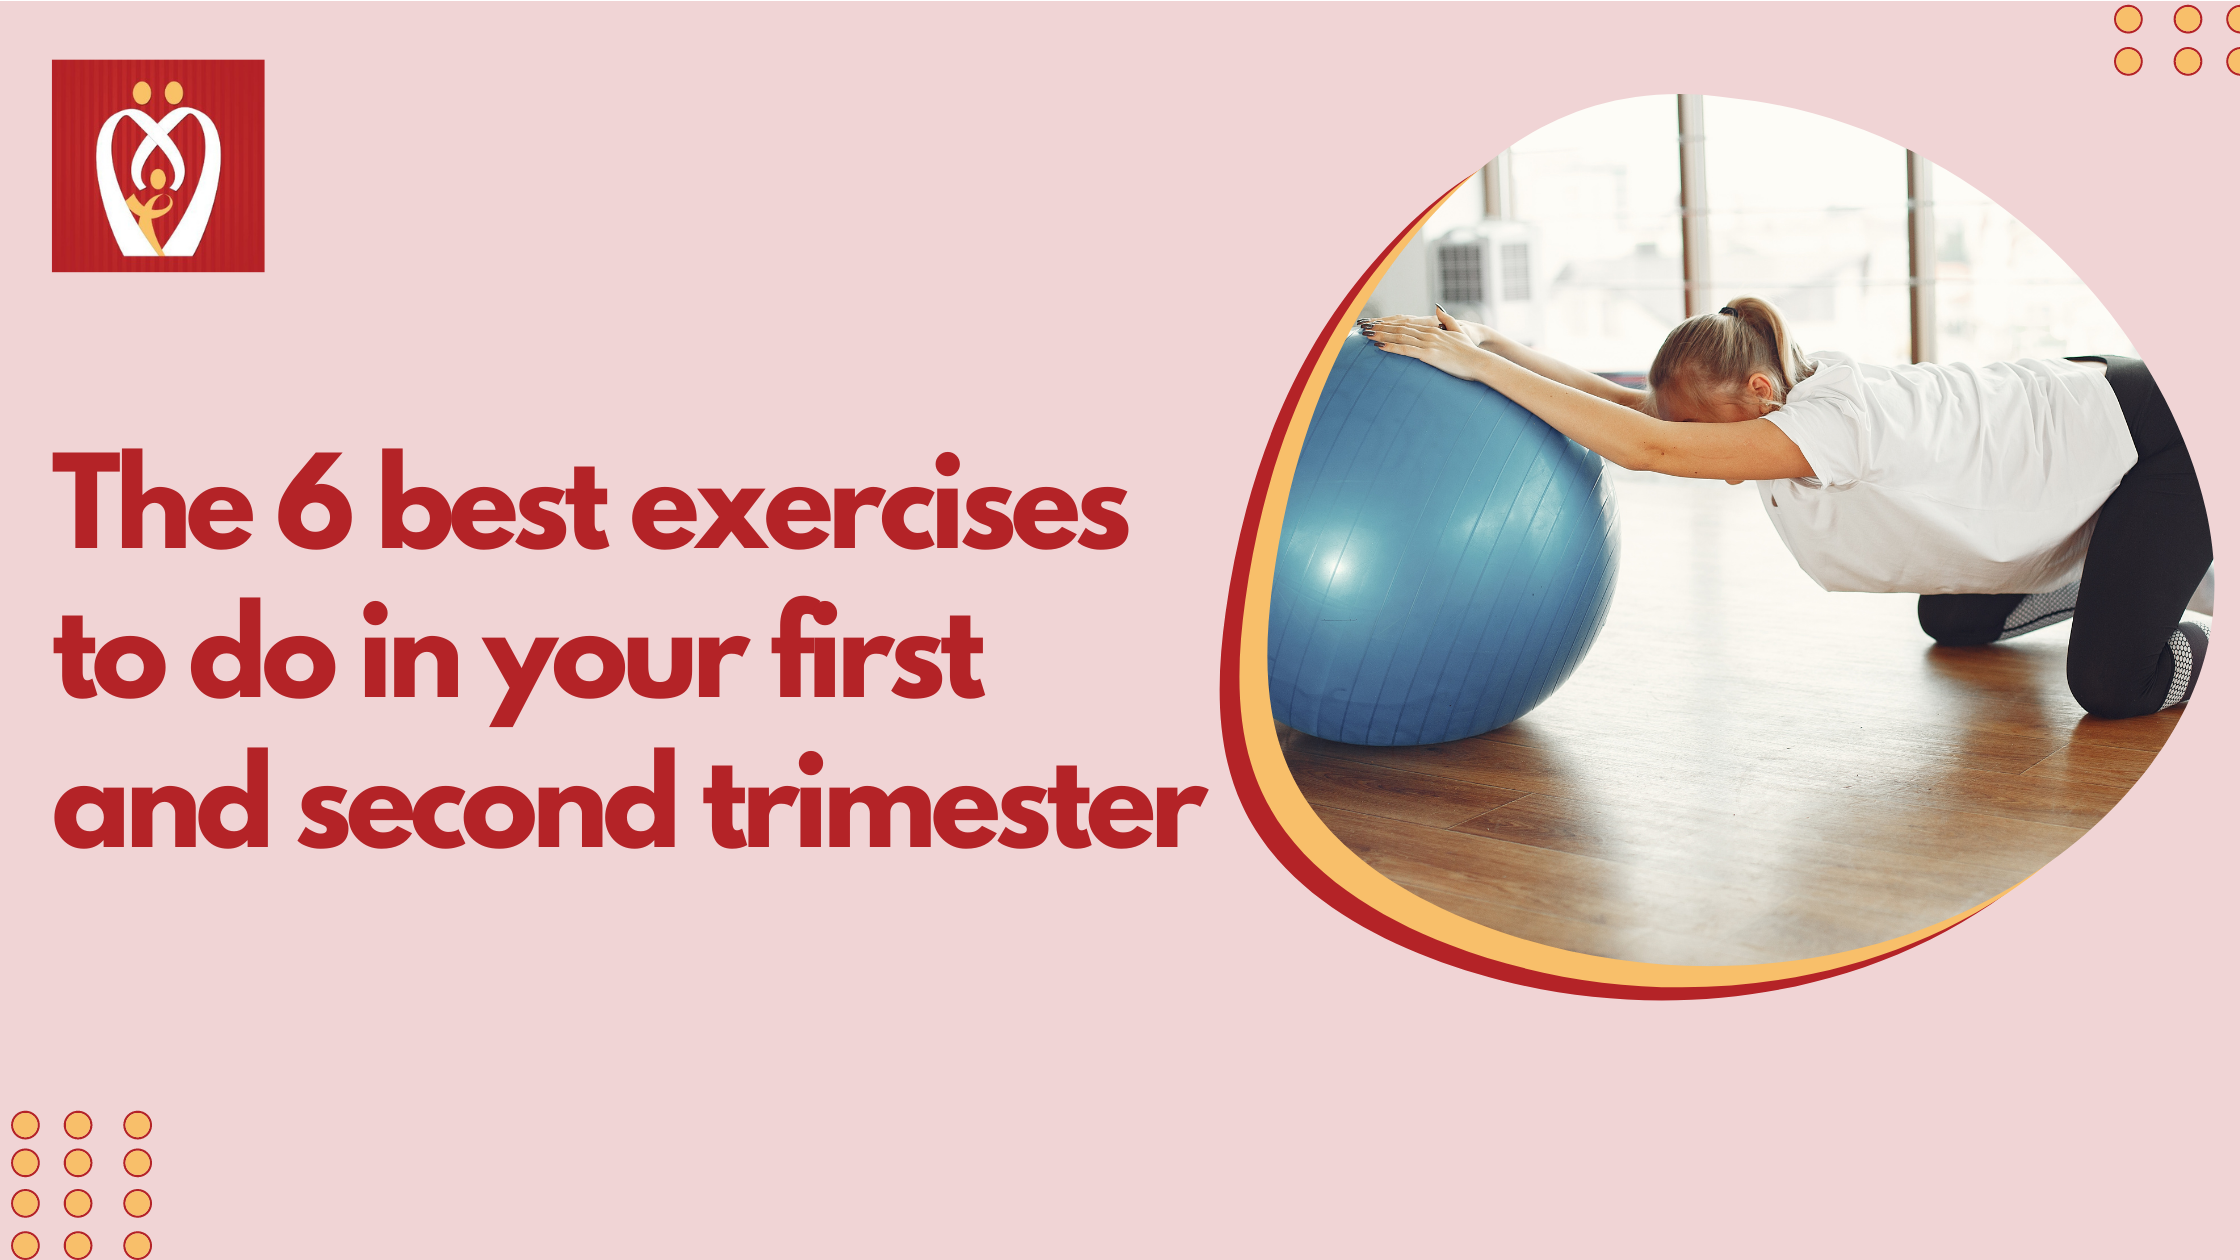 The 6 best exercises to do in your first and second trimester